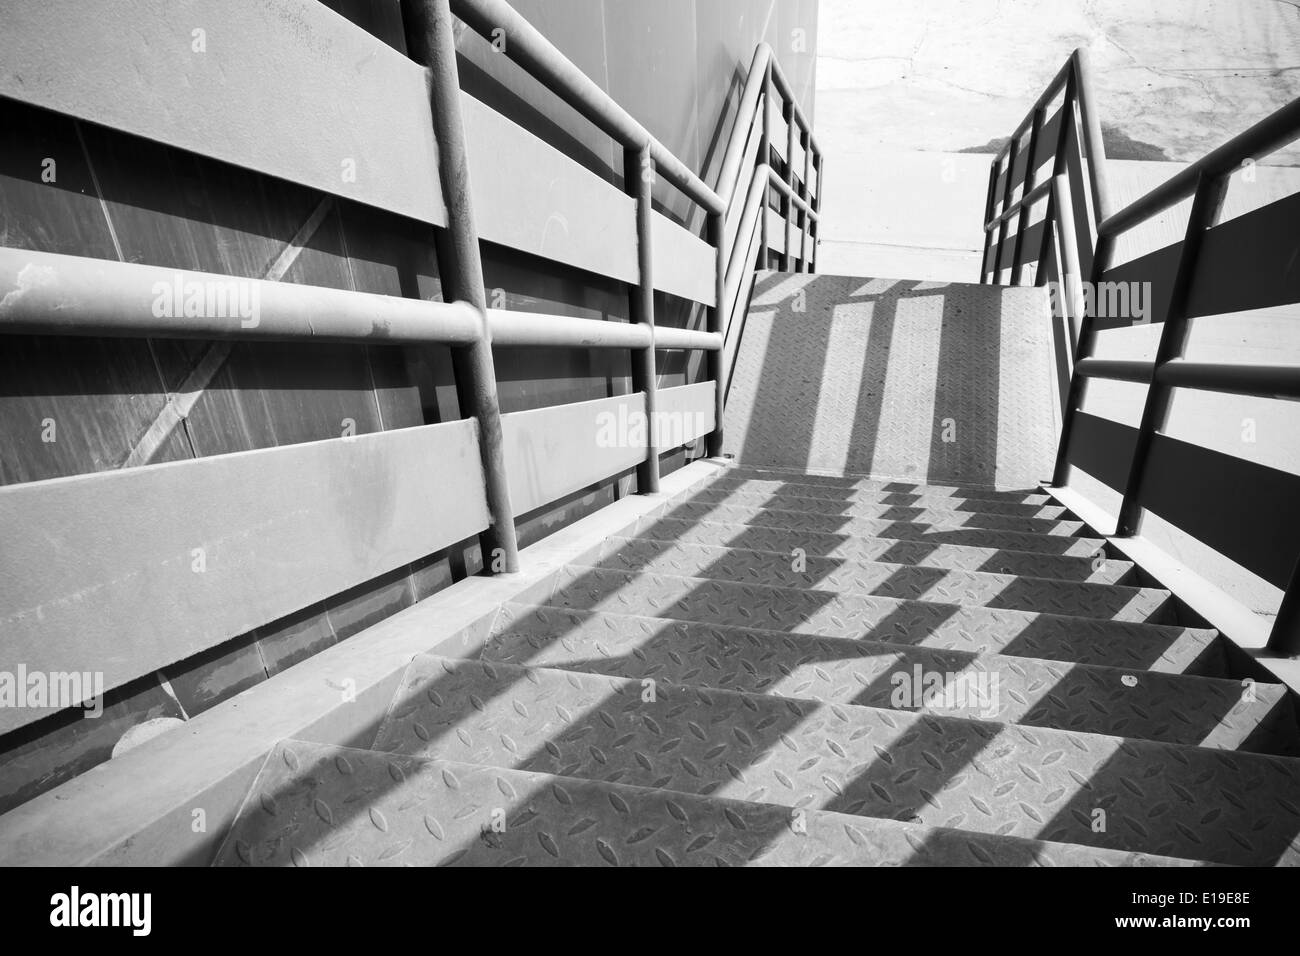 Industrial metal staircase perspective with nice shadows pattern Stock Photo